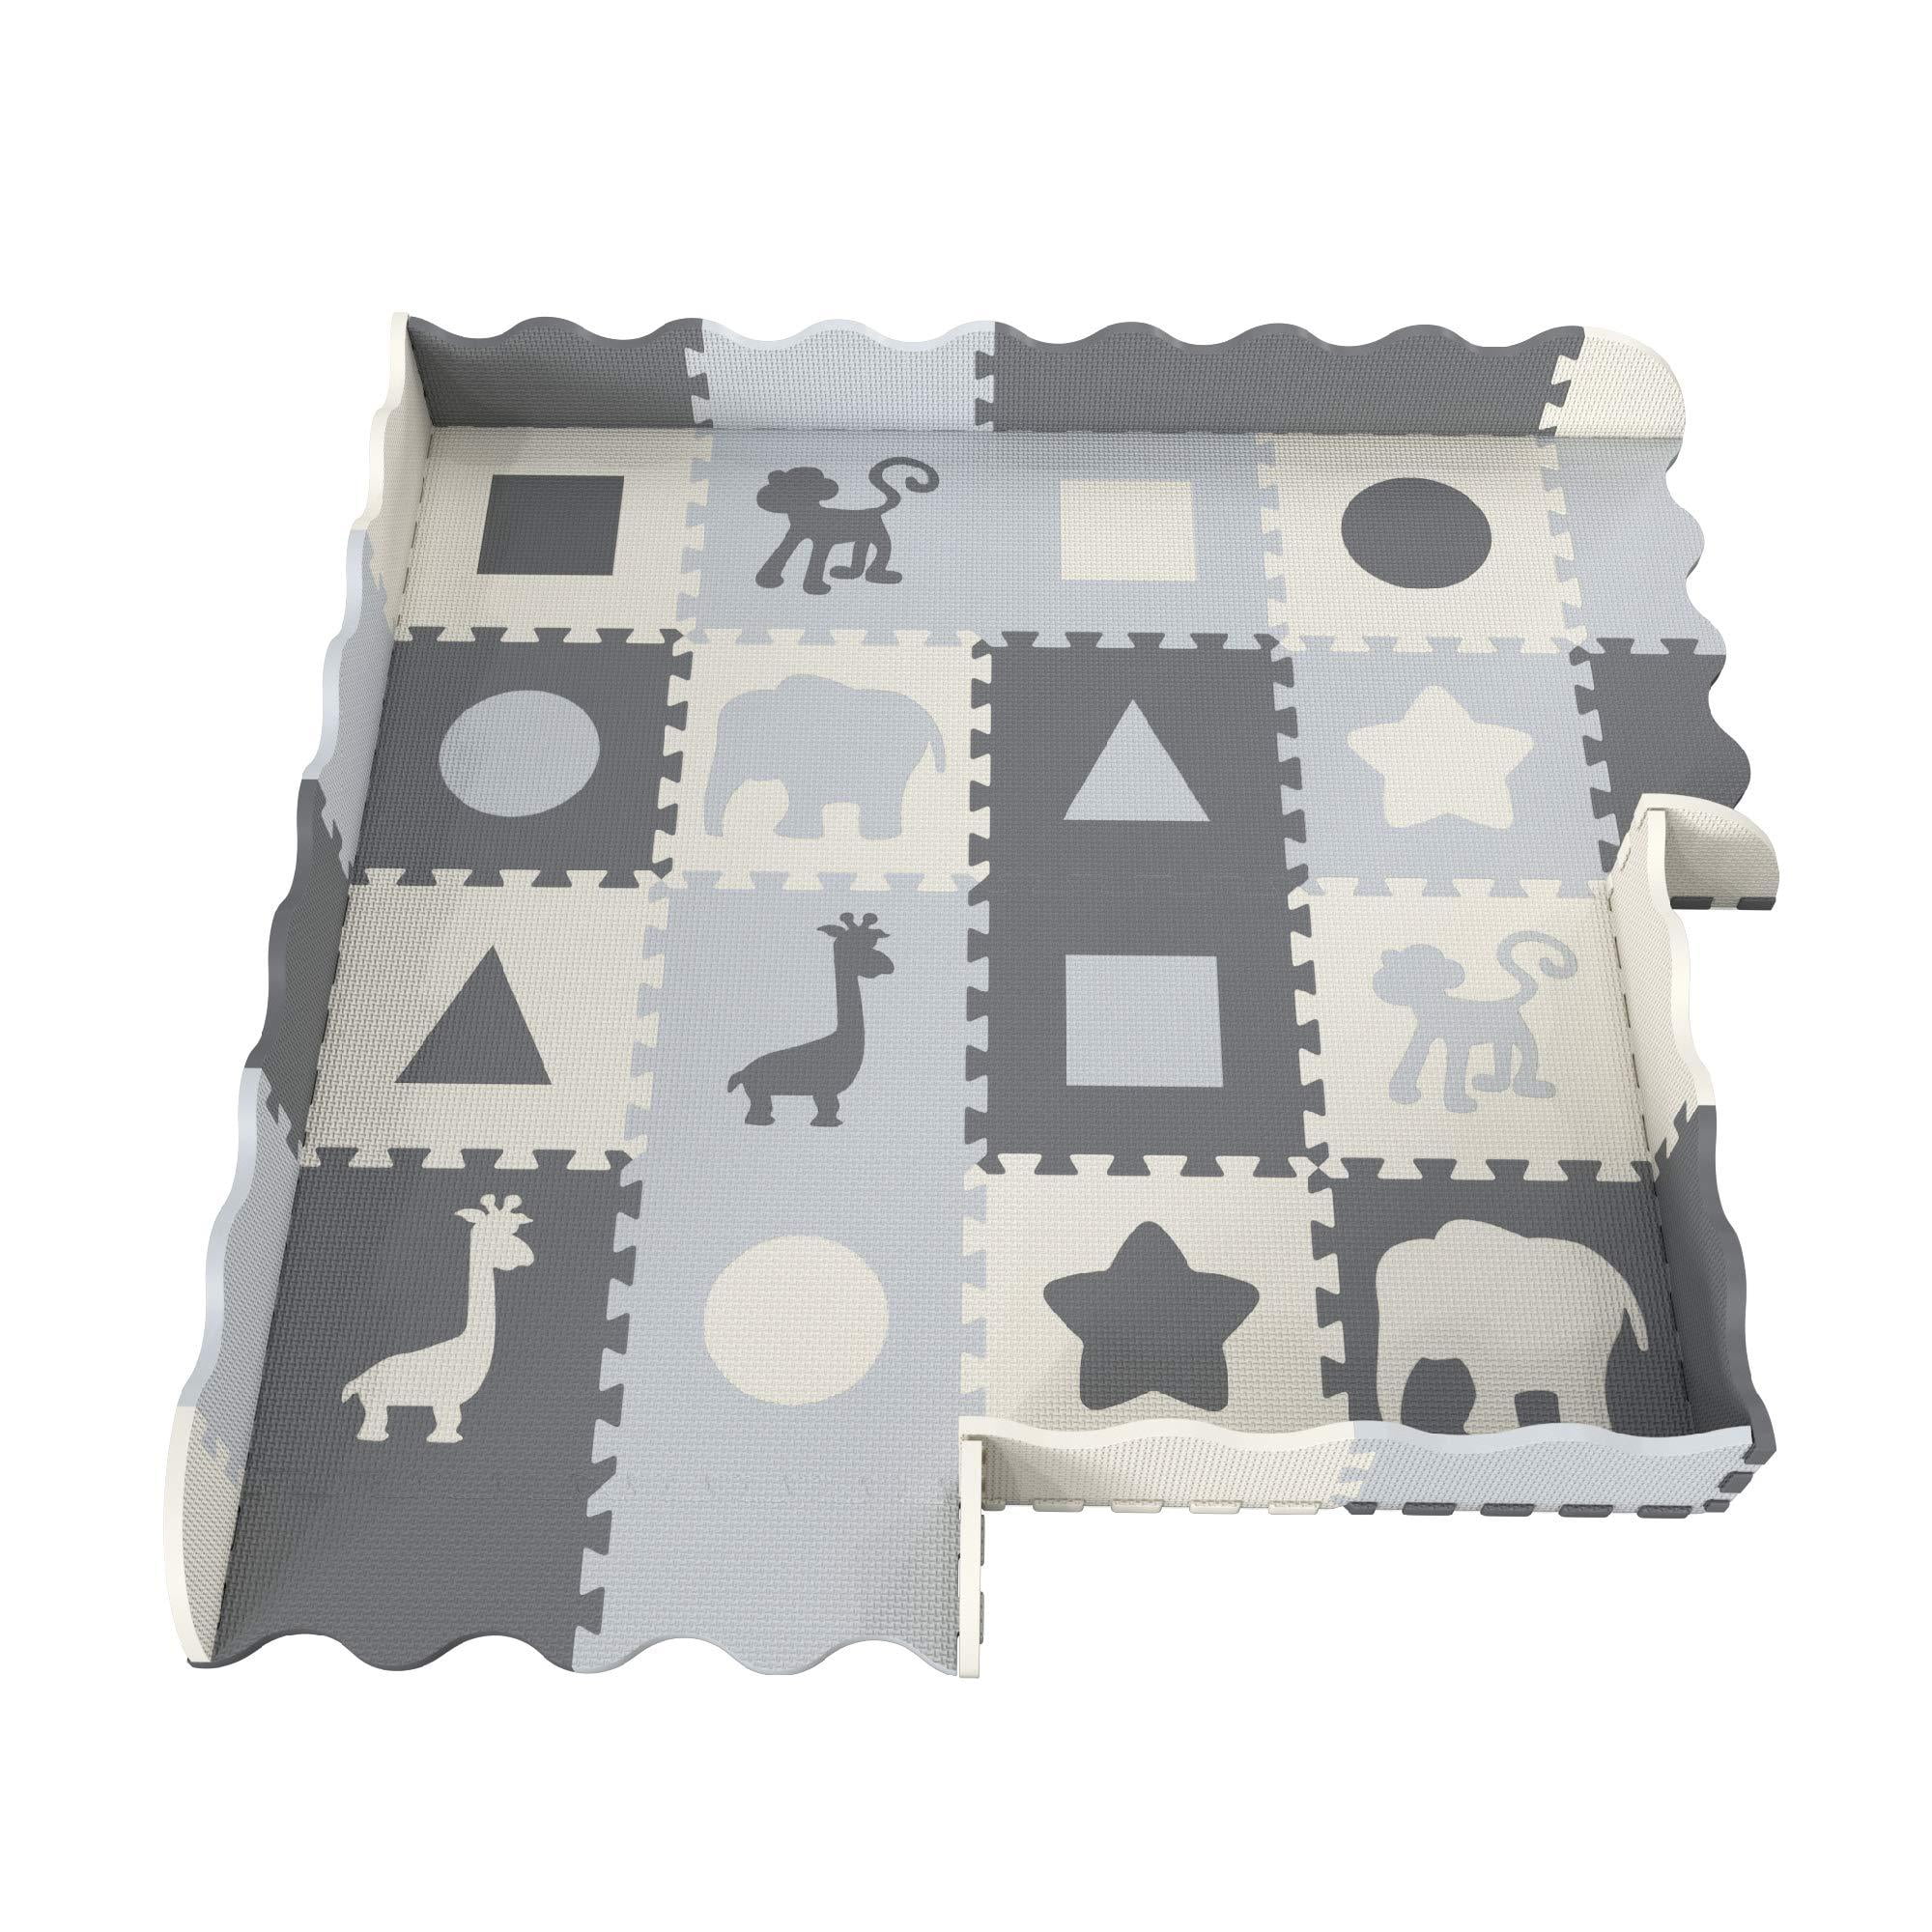 Soft Foam Baby Play Mat Perfect, Black And White Foam Floor Tiles Baby